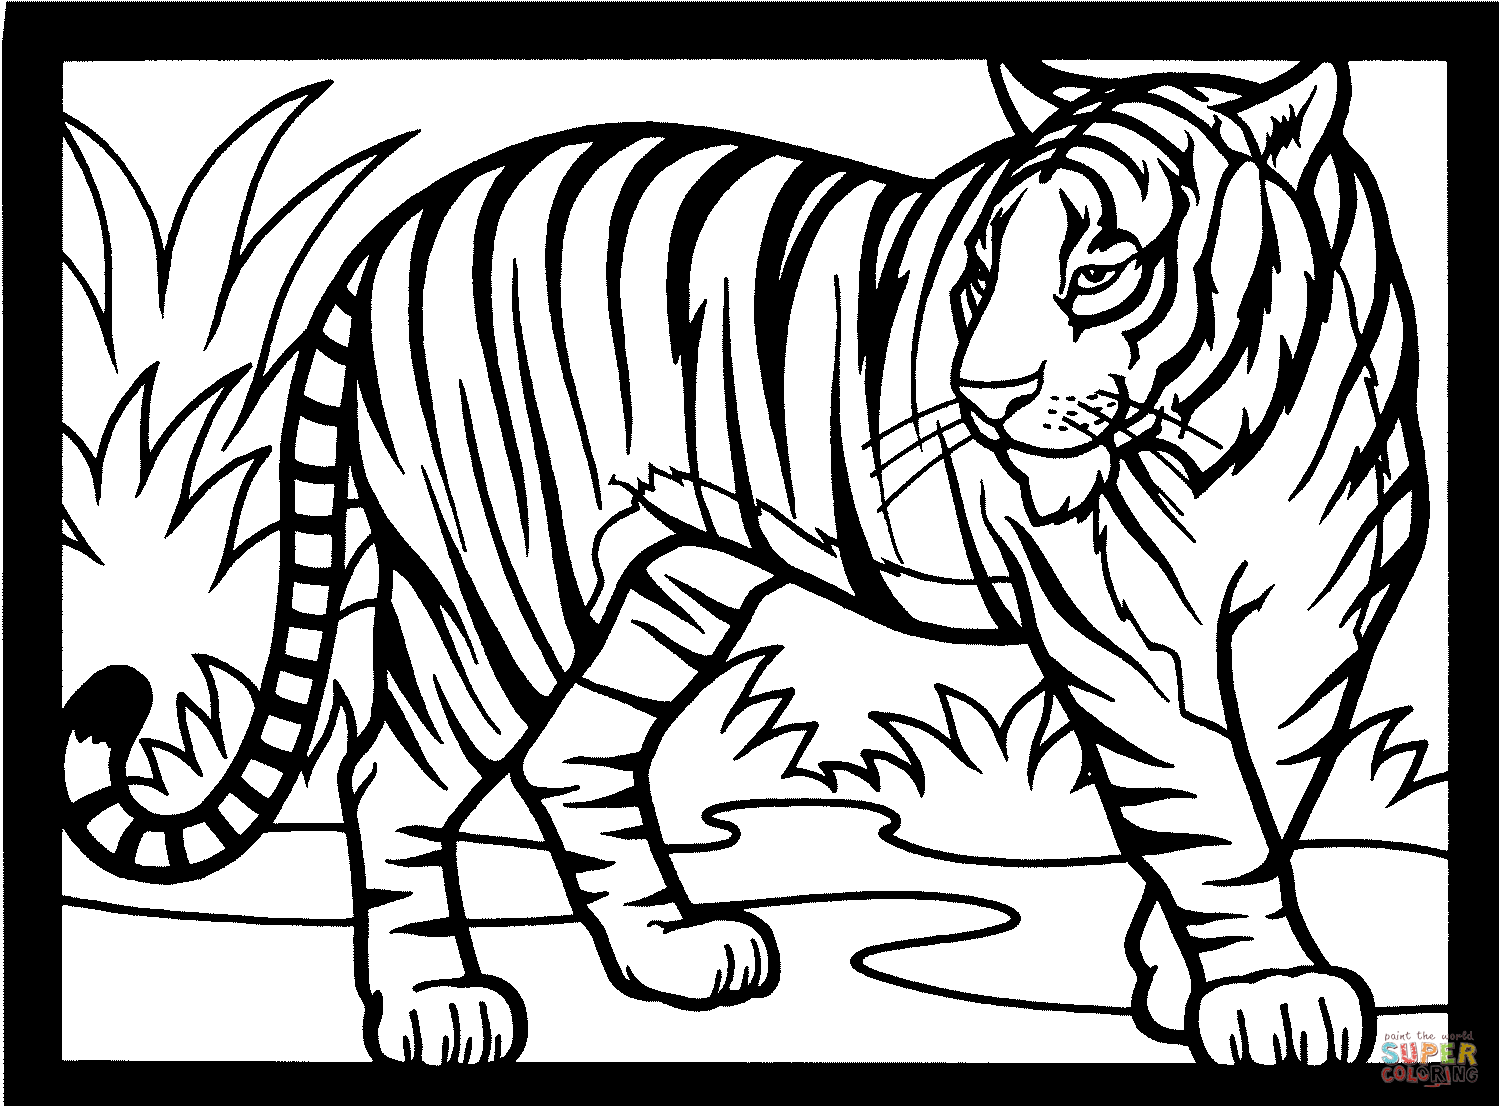 Tiger The King Coloring Page To Print - VoteForVerde.com